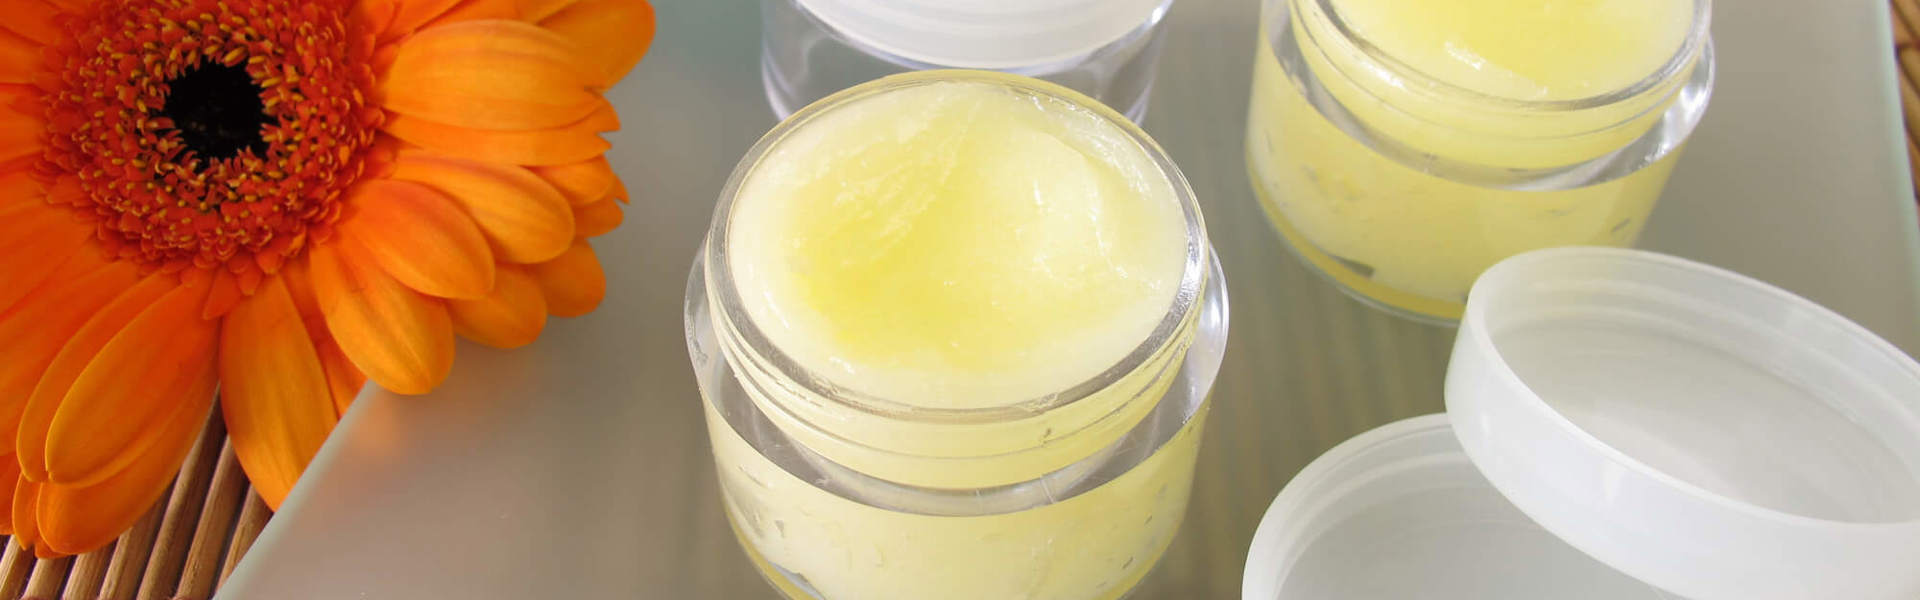 two containers of homemade yellow lip balm 